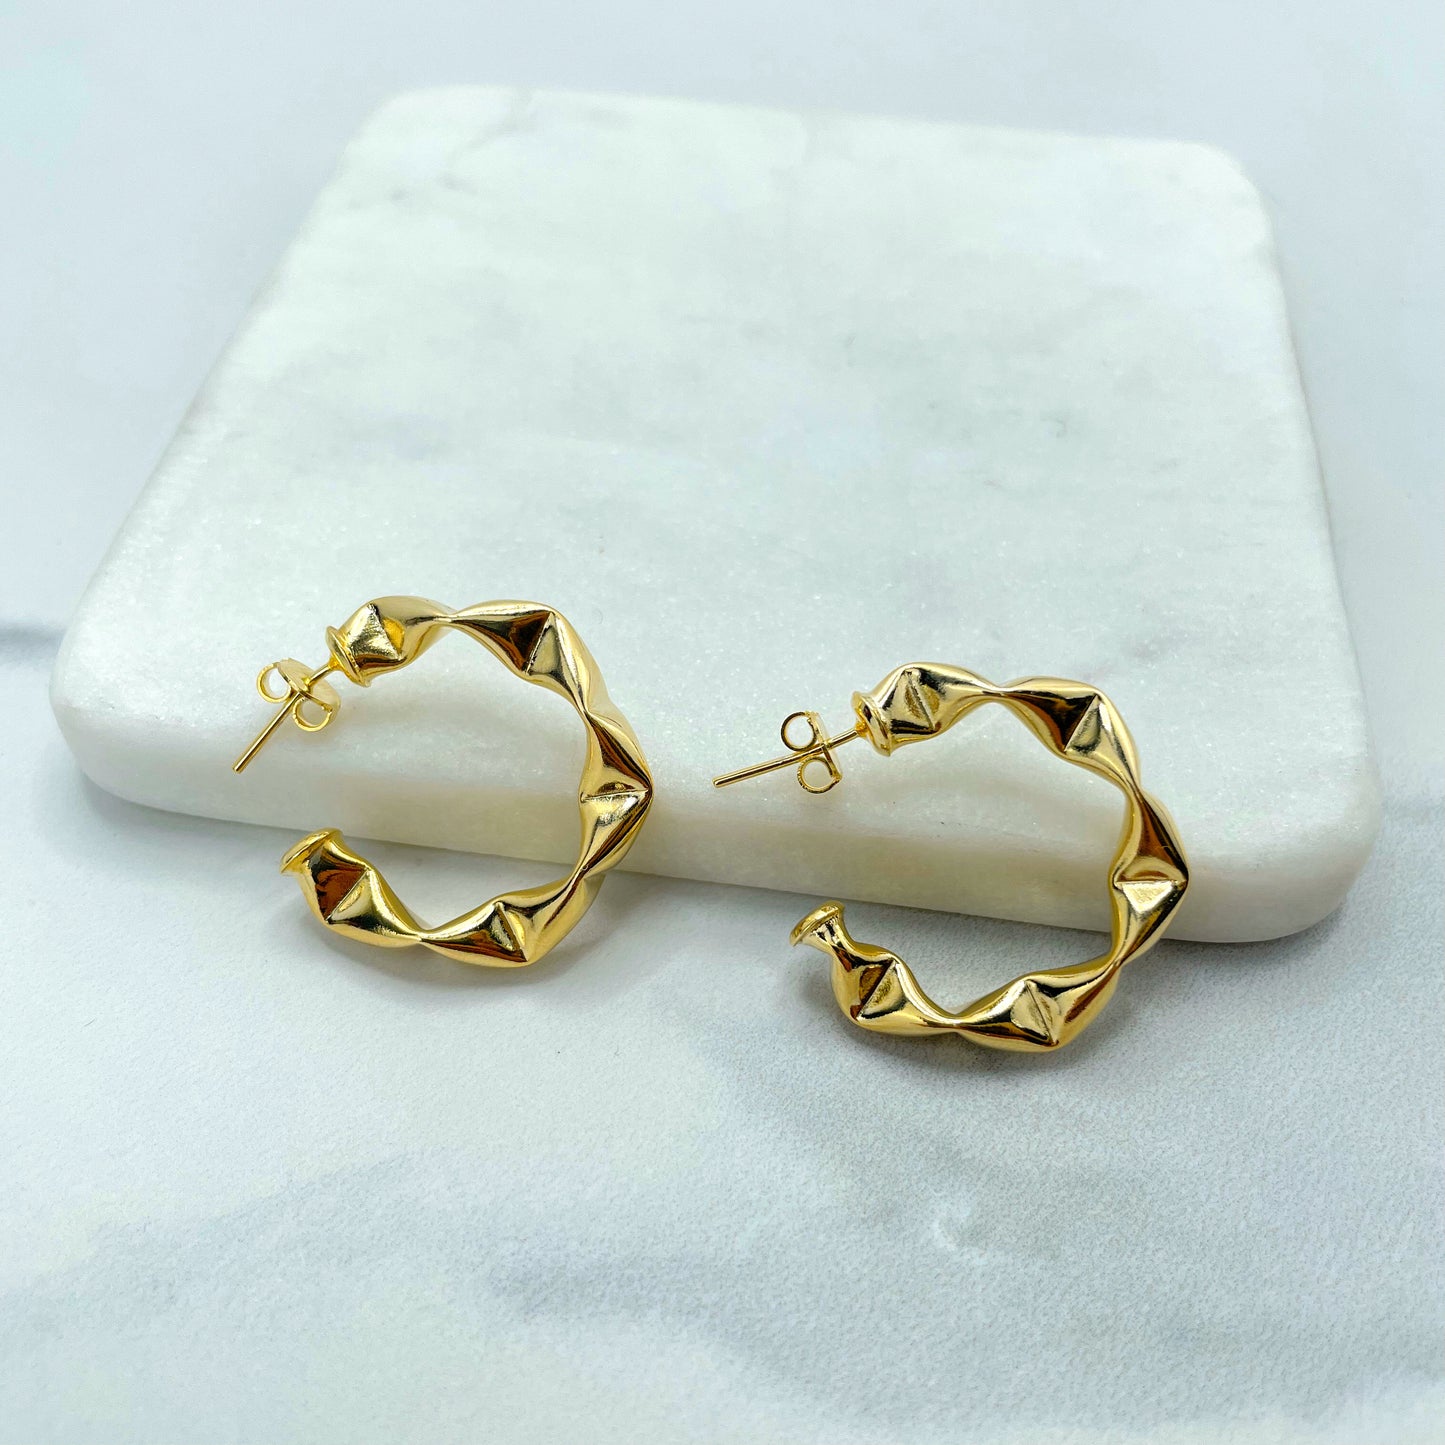 18k Gold Filled 28mm Classic & Modern Texturized Hoops Earrings Wholesale Jewelry Making Supplies